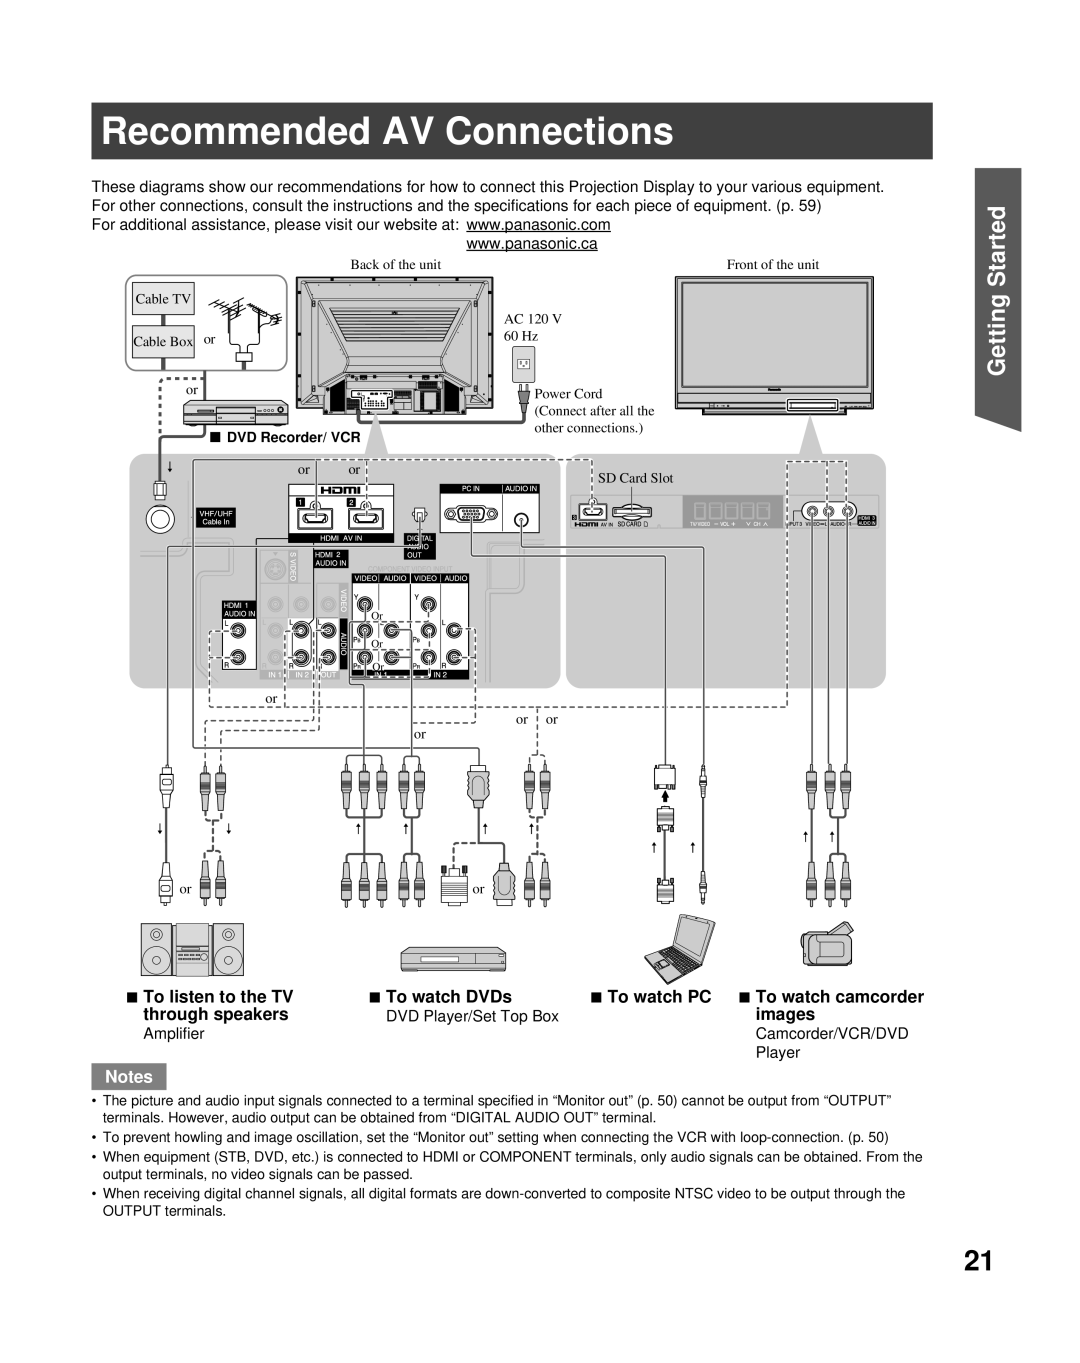 Panasonic PT-61LCX7 Recommended AV Connections, Started, Getting, To listen to the TV, To watch DVDs, through speakers 